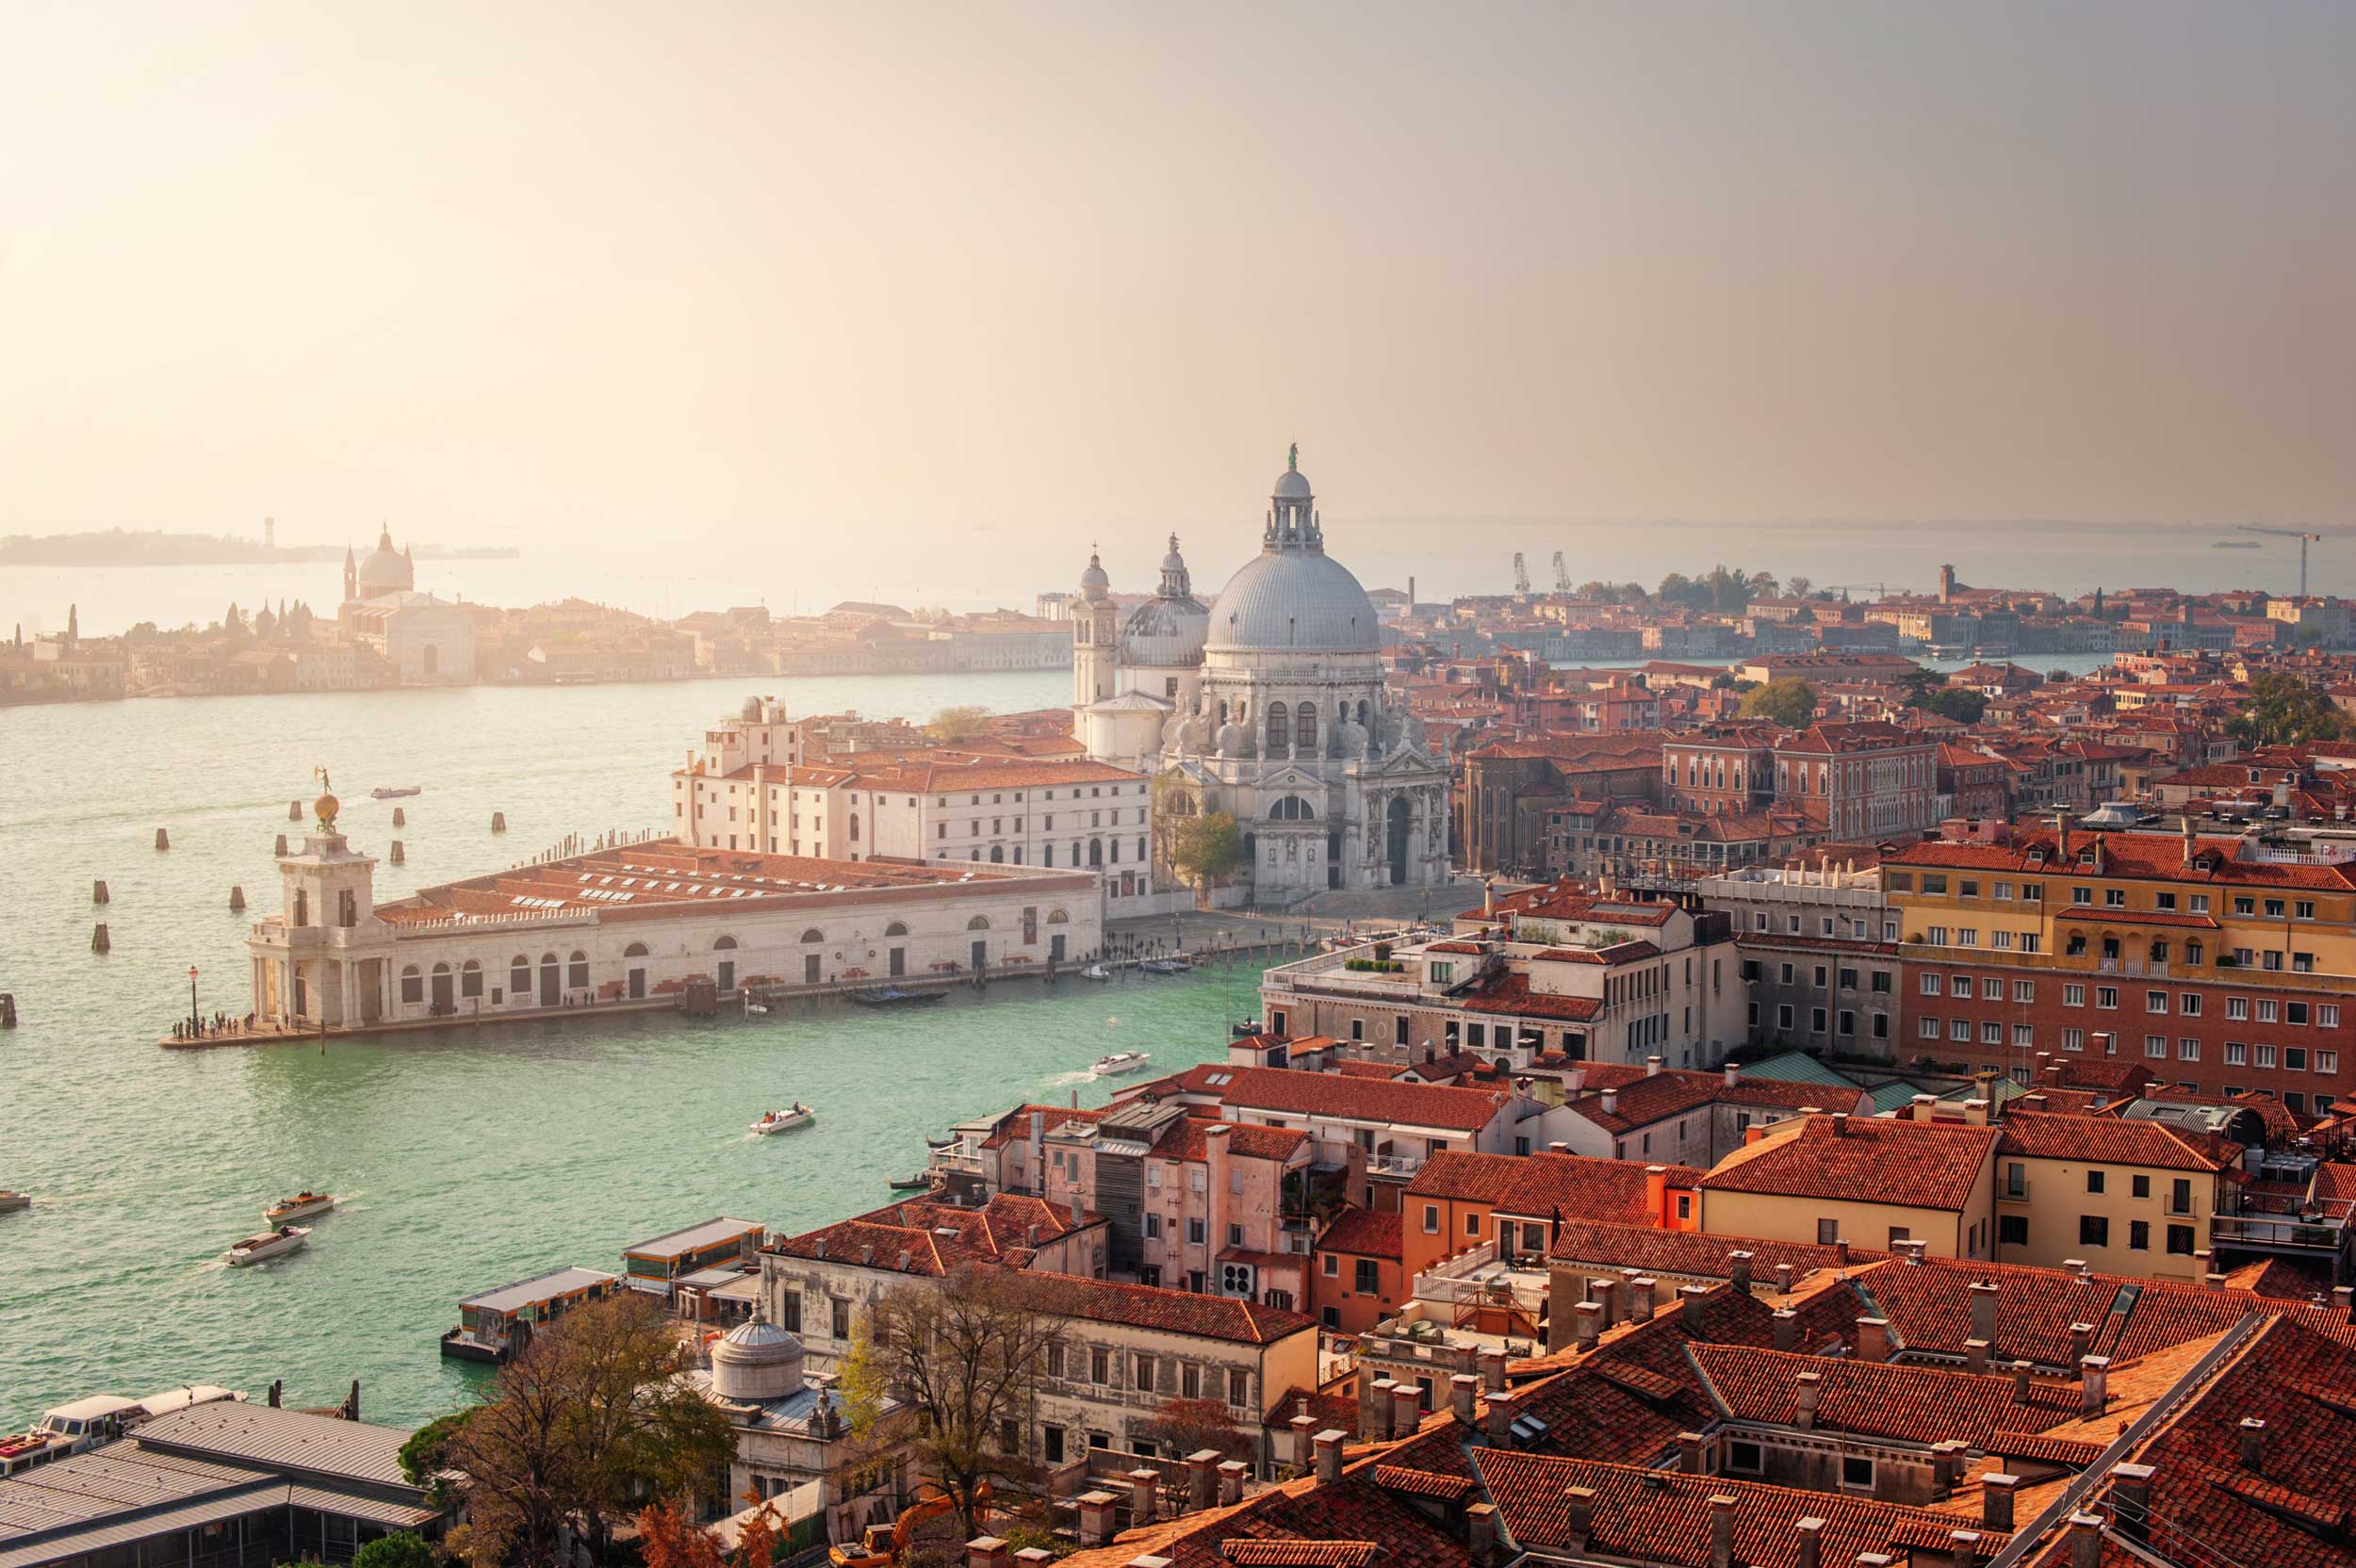 Heli-tours from Venice